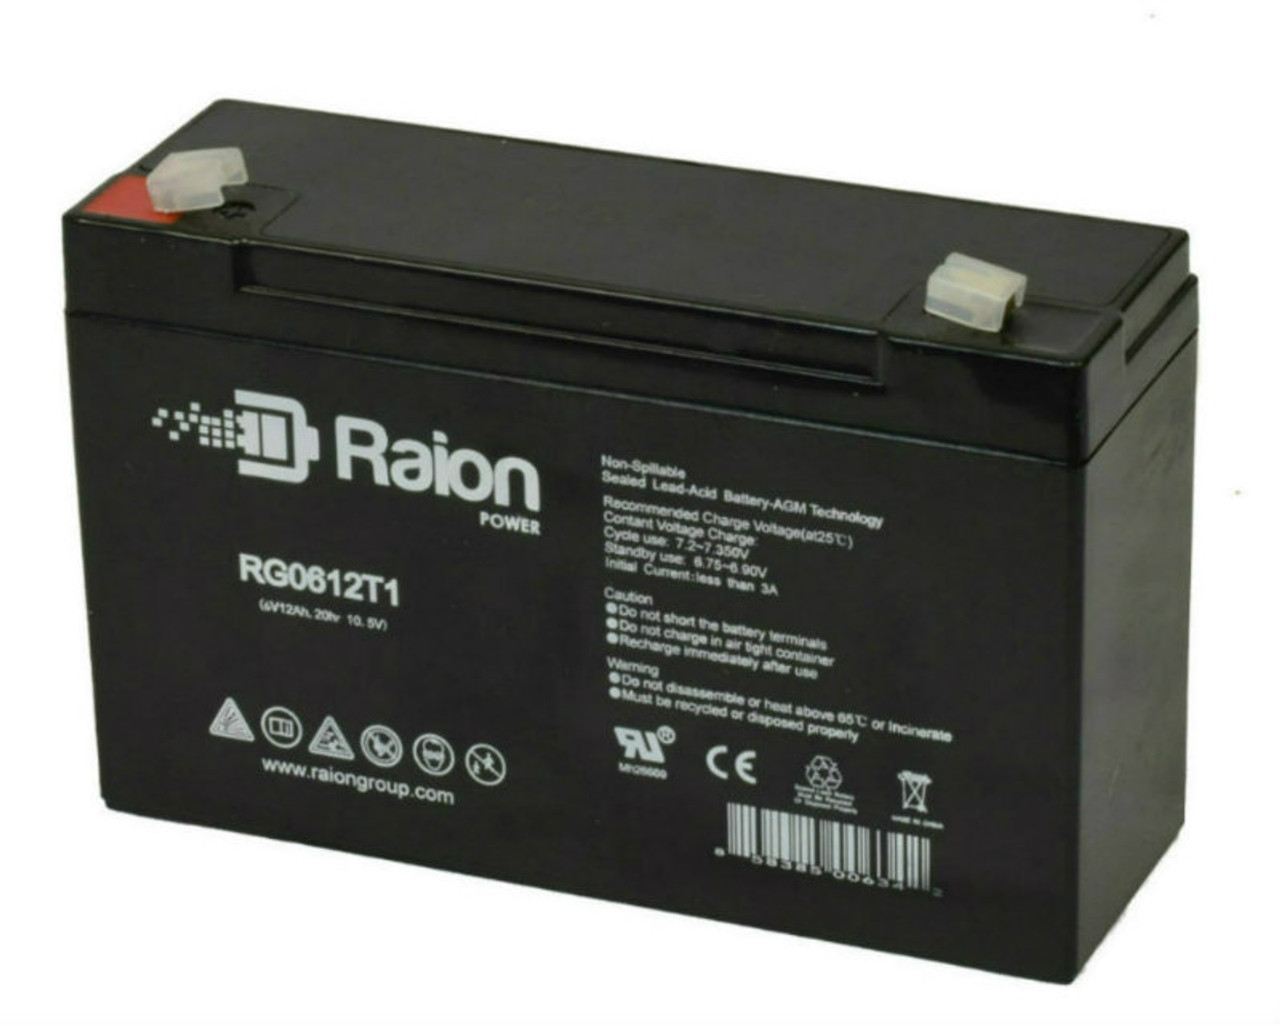 Raion Power RG06120T1 Replacement 6V 12Ah Emergency Light Battery for Sure-Lites 12UMB2000